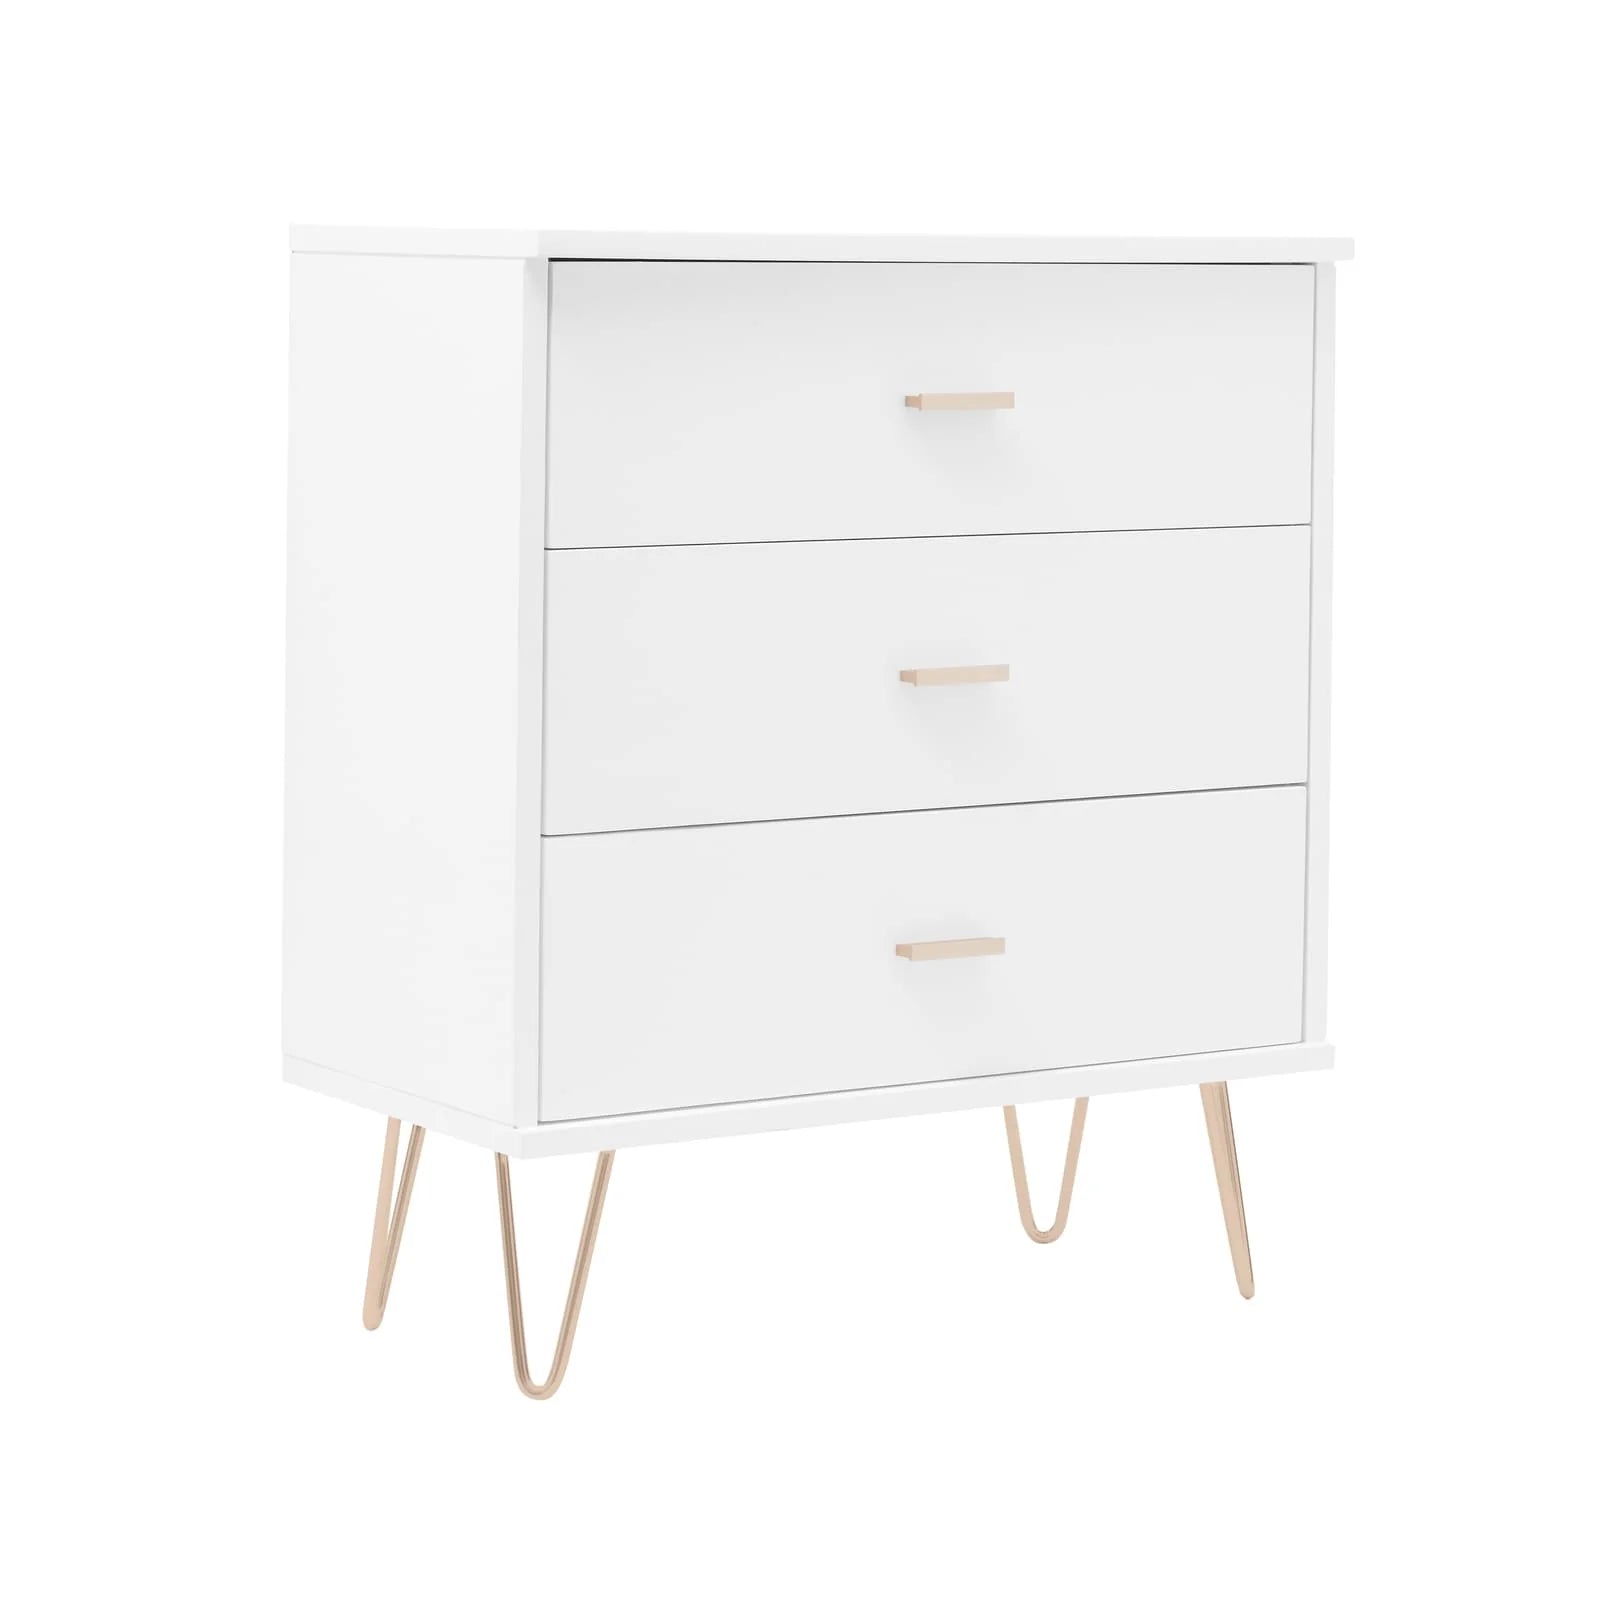 Monroe white painted solid wood chest of drawers with metal hardware | malletandplane.com